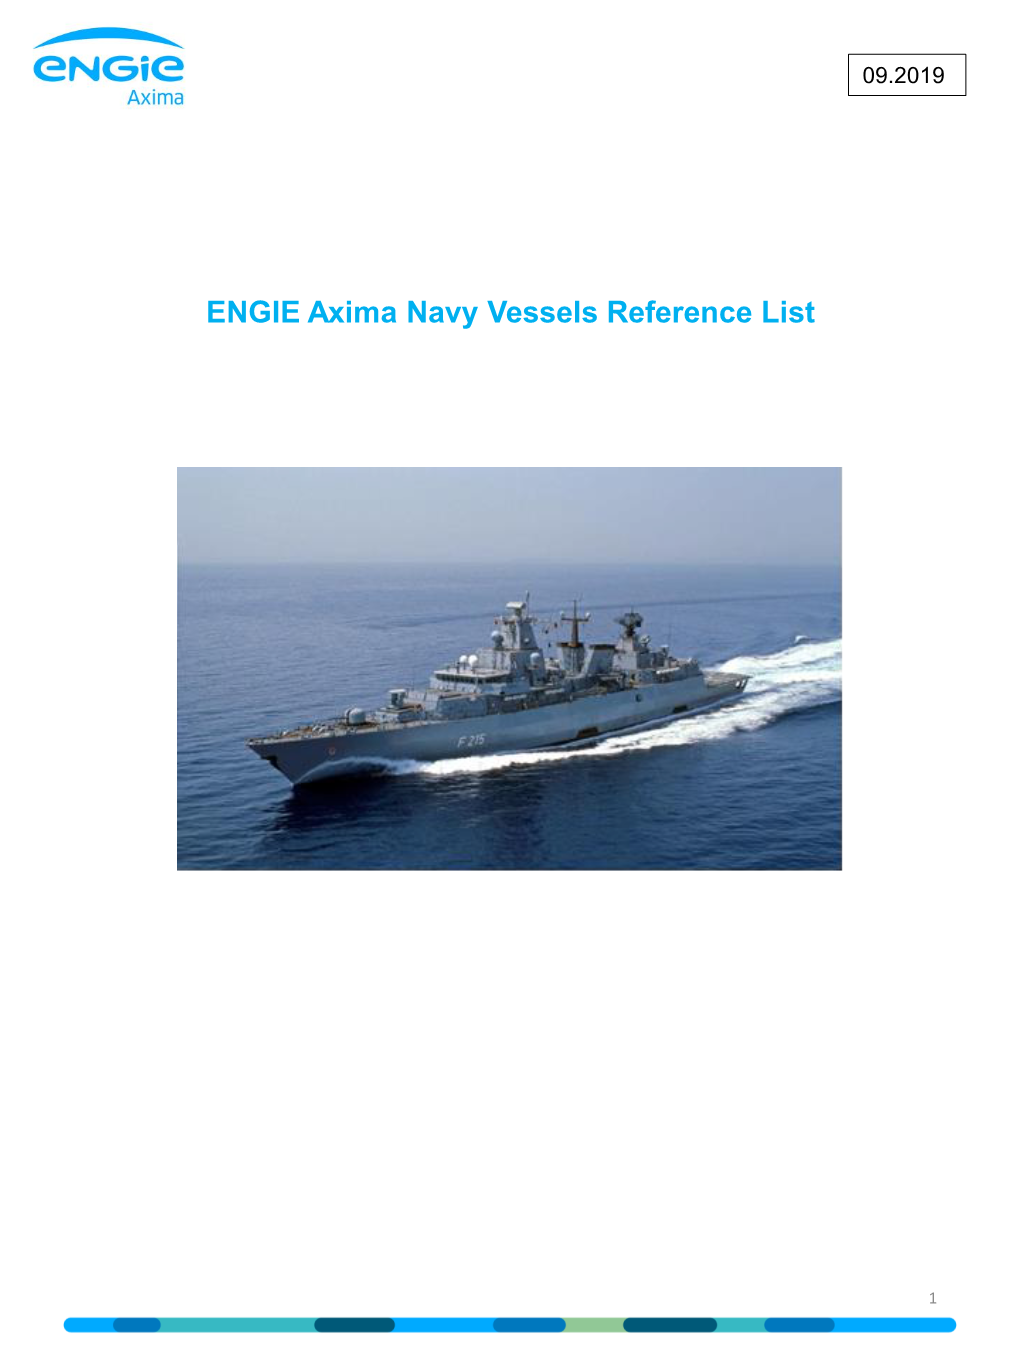 ENGIE Axima Navy Vessels Reference List